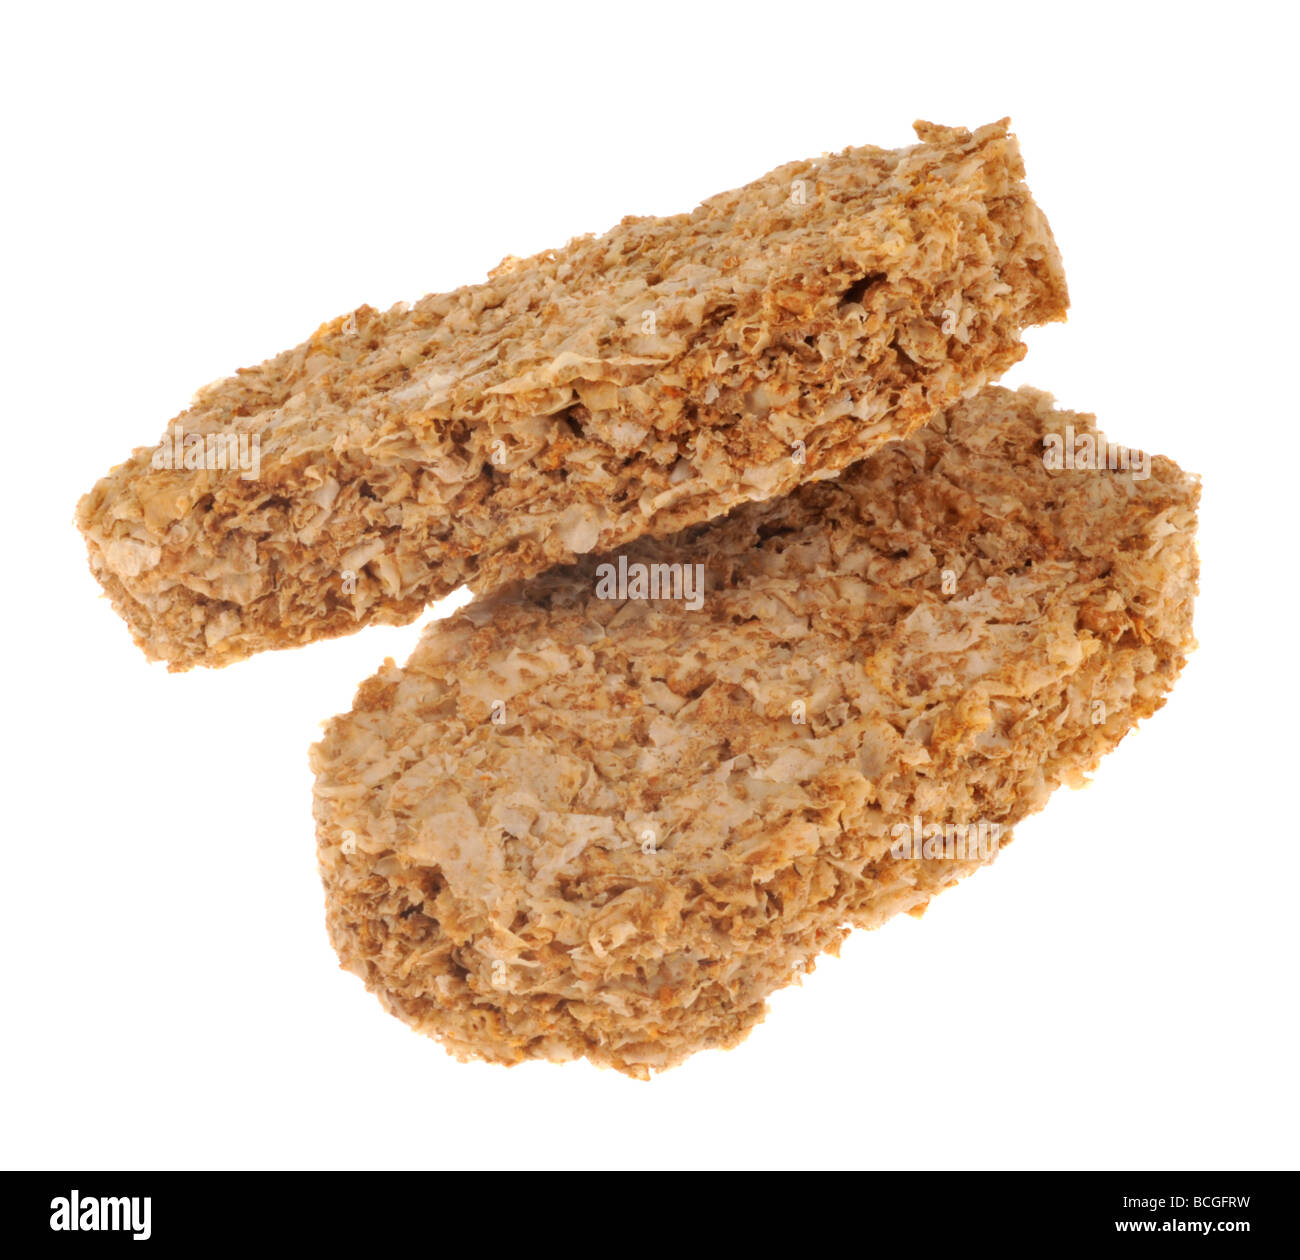 Wheat biscuit cereal Stock Photo